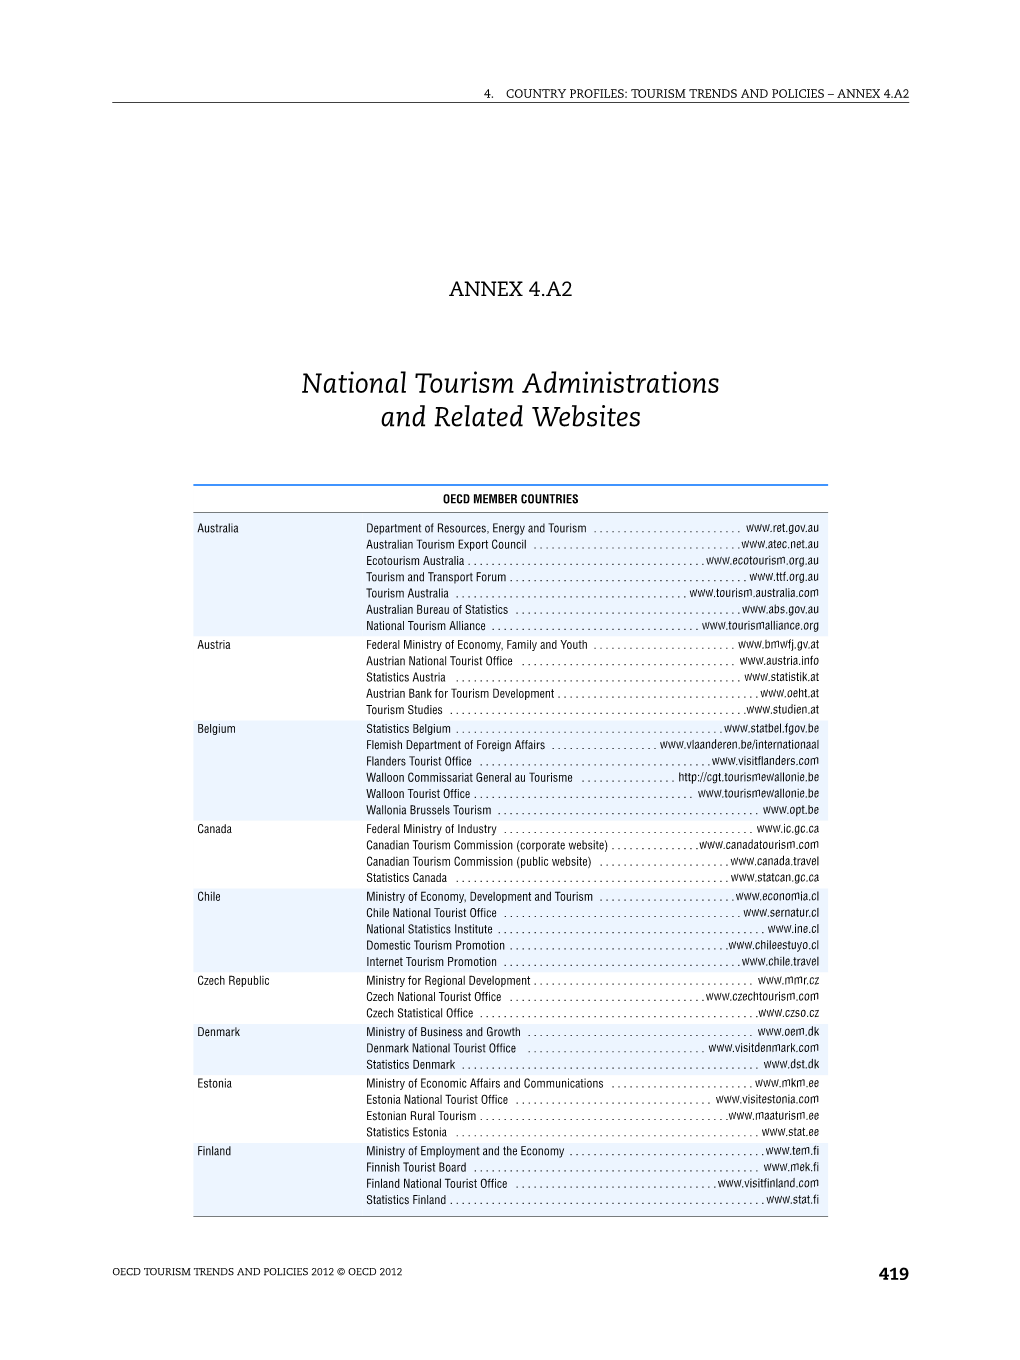 National Tourism Administrations and Related Websites